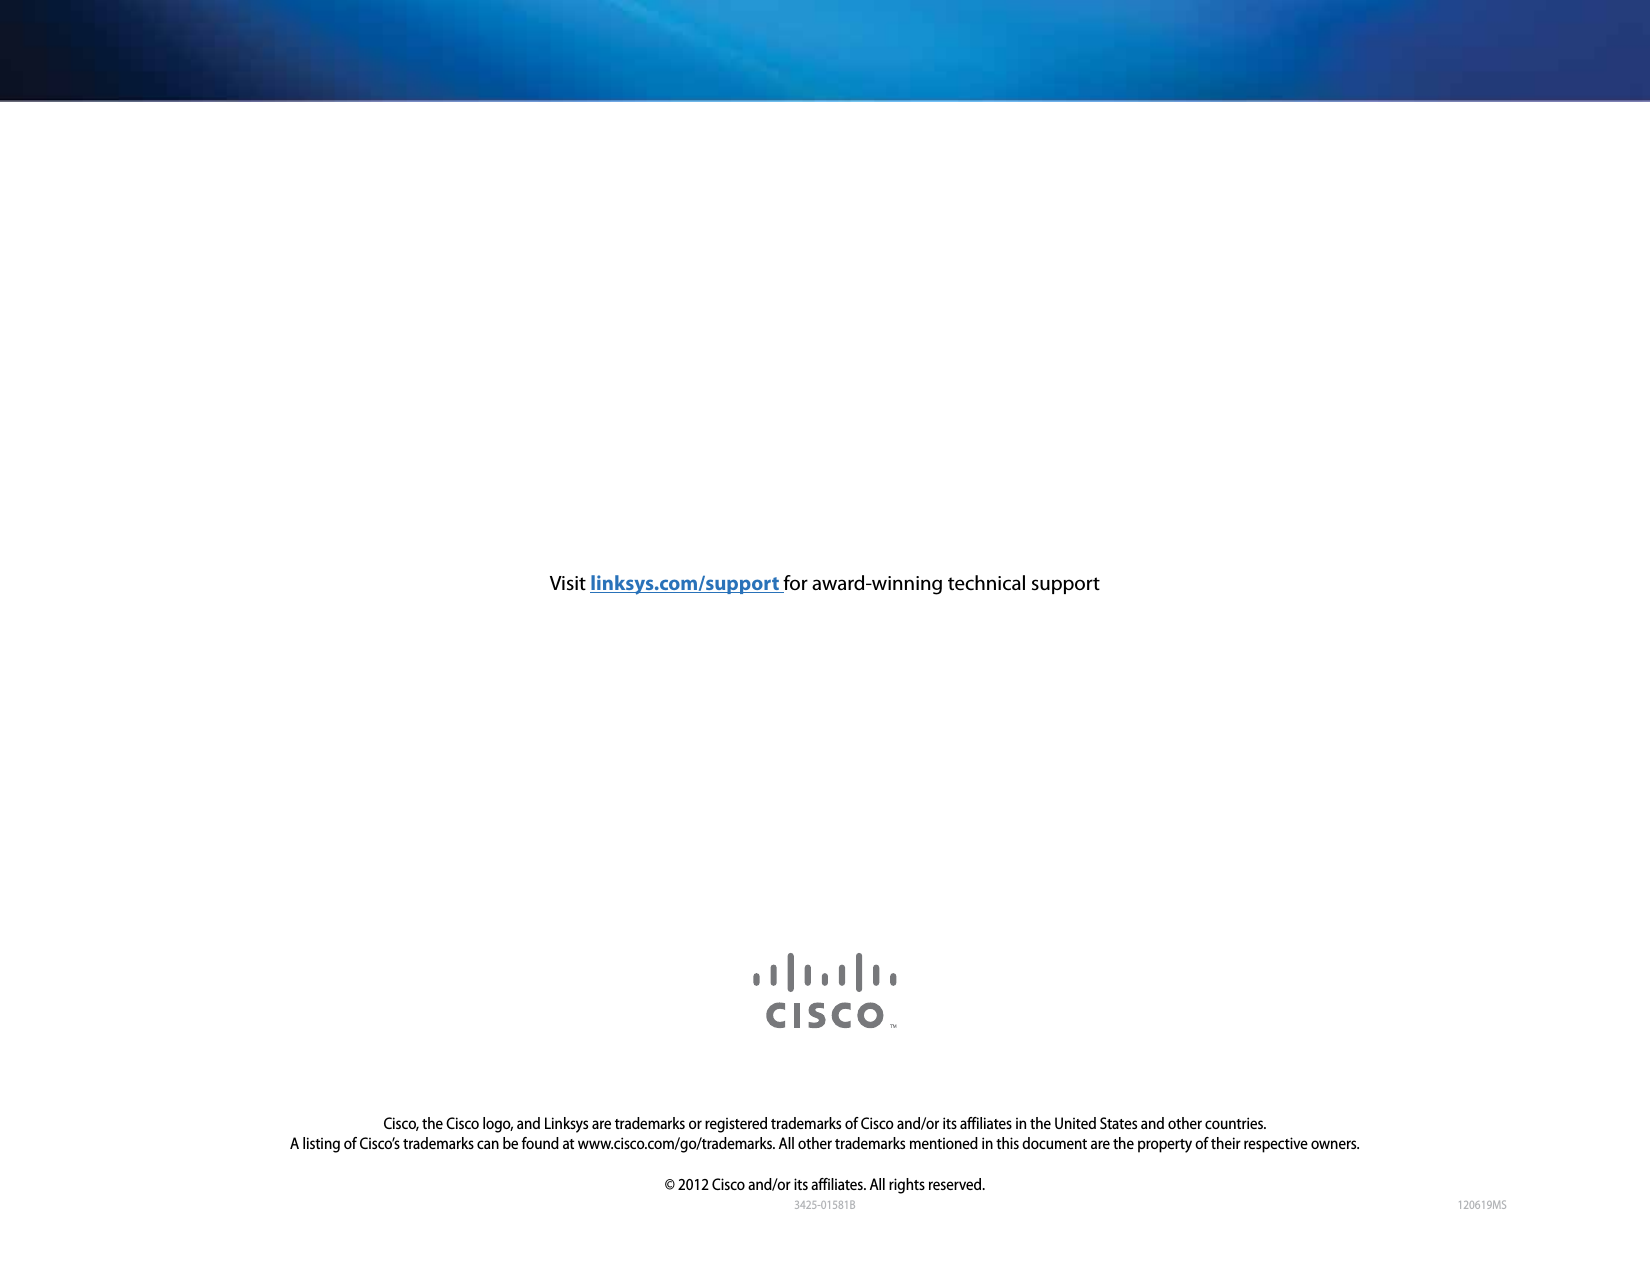 3425-01581B 120619MSCisco, the Cisco logo, and Linksys are trademarks or registered trademarks of Cisco and/or its affiliates in the United States and other countries. A listing of Cisco’s trademarks can be found at www.cisco.com/go/trademarks. All other trademarks mentioned in this document are the property of their respective owners.© 2012 Cisco and/or its affiliates. All rights reserved.Visit linksys.com/support for award-winning technical support